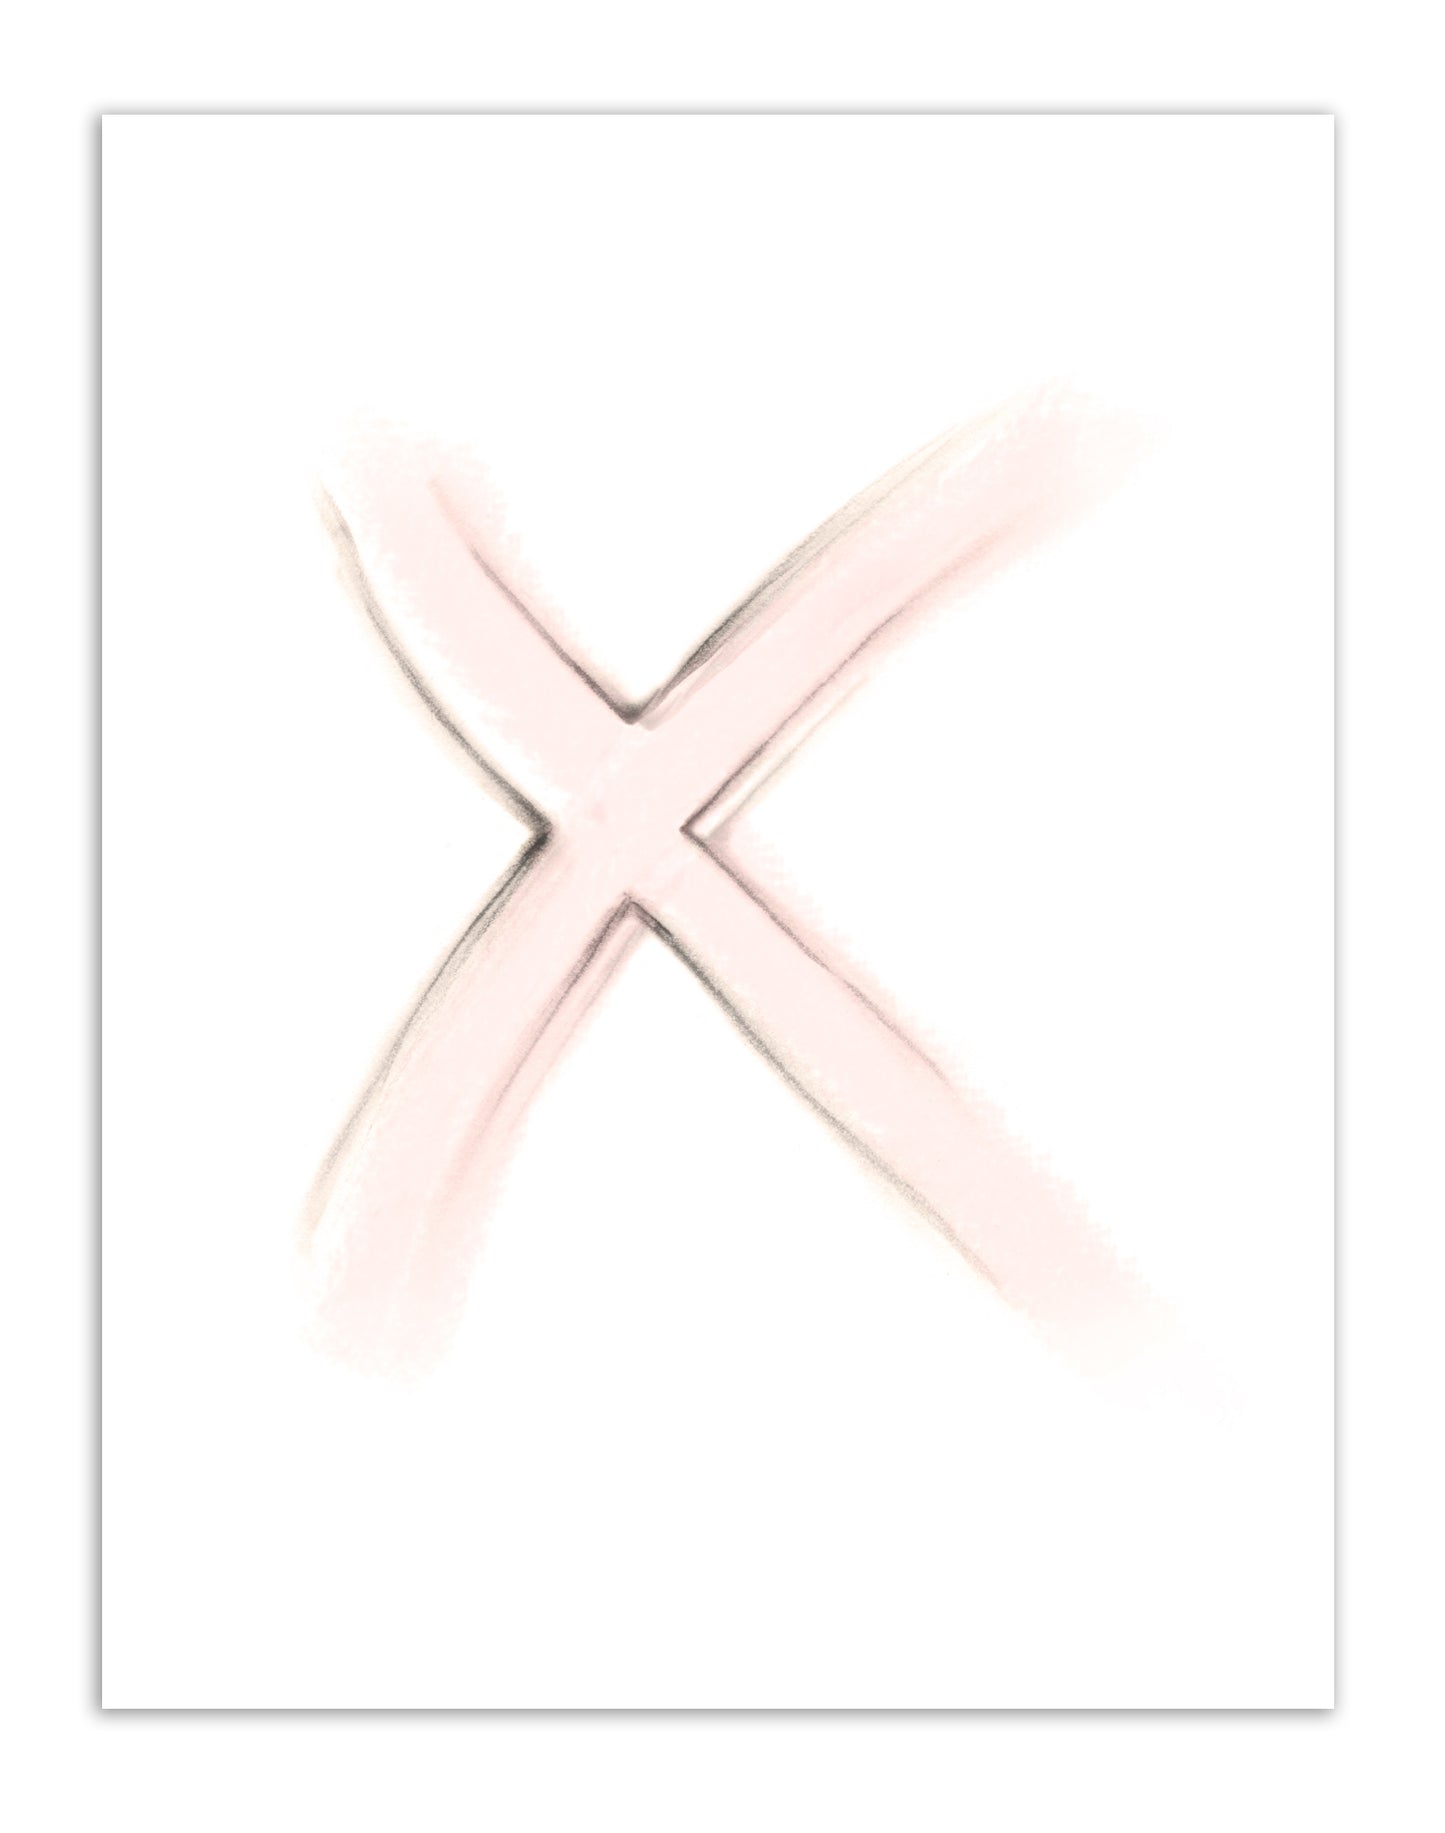 Drawing of the letter X in shades of pink and sepia - Studio Q - Art by Nicky Quartermaine Scott